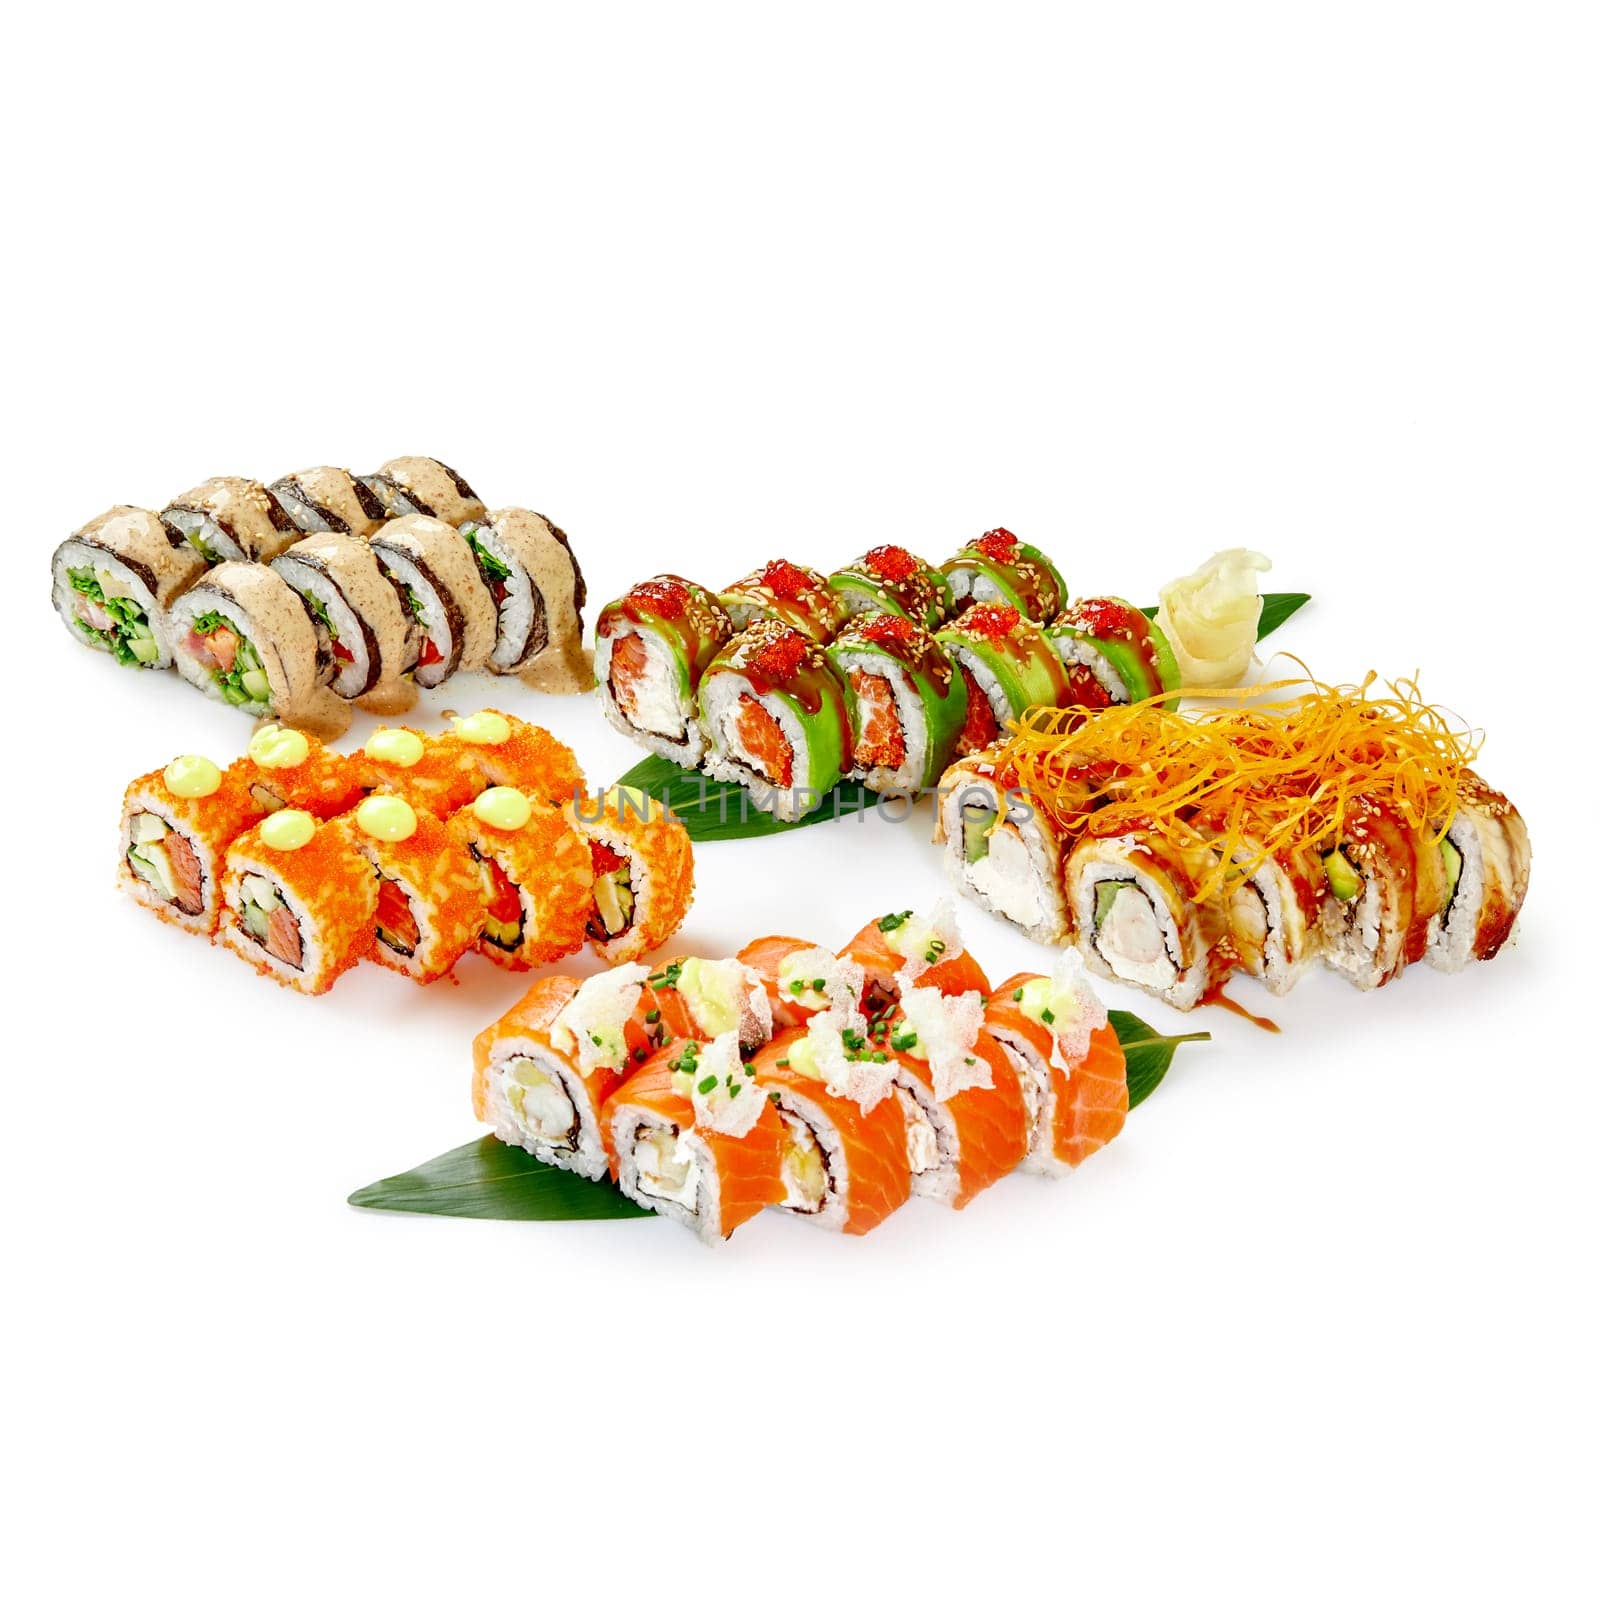 Diverse collection of specialty sushi rolls on bamboo leaves by nazarovsergey